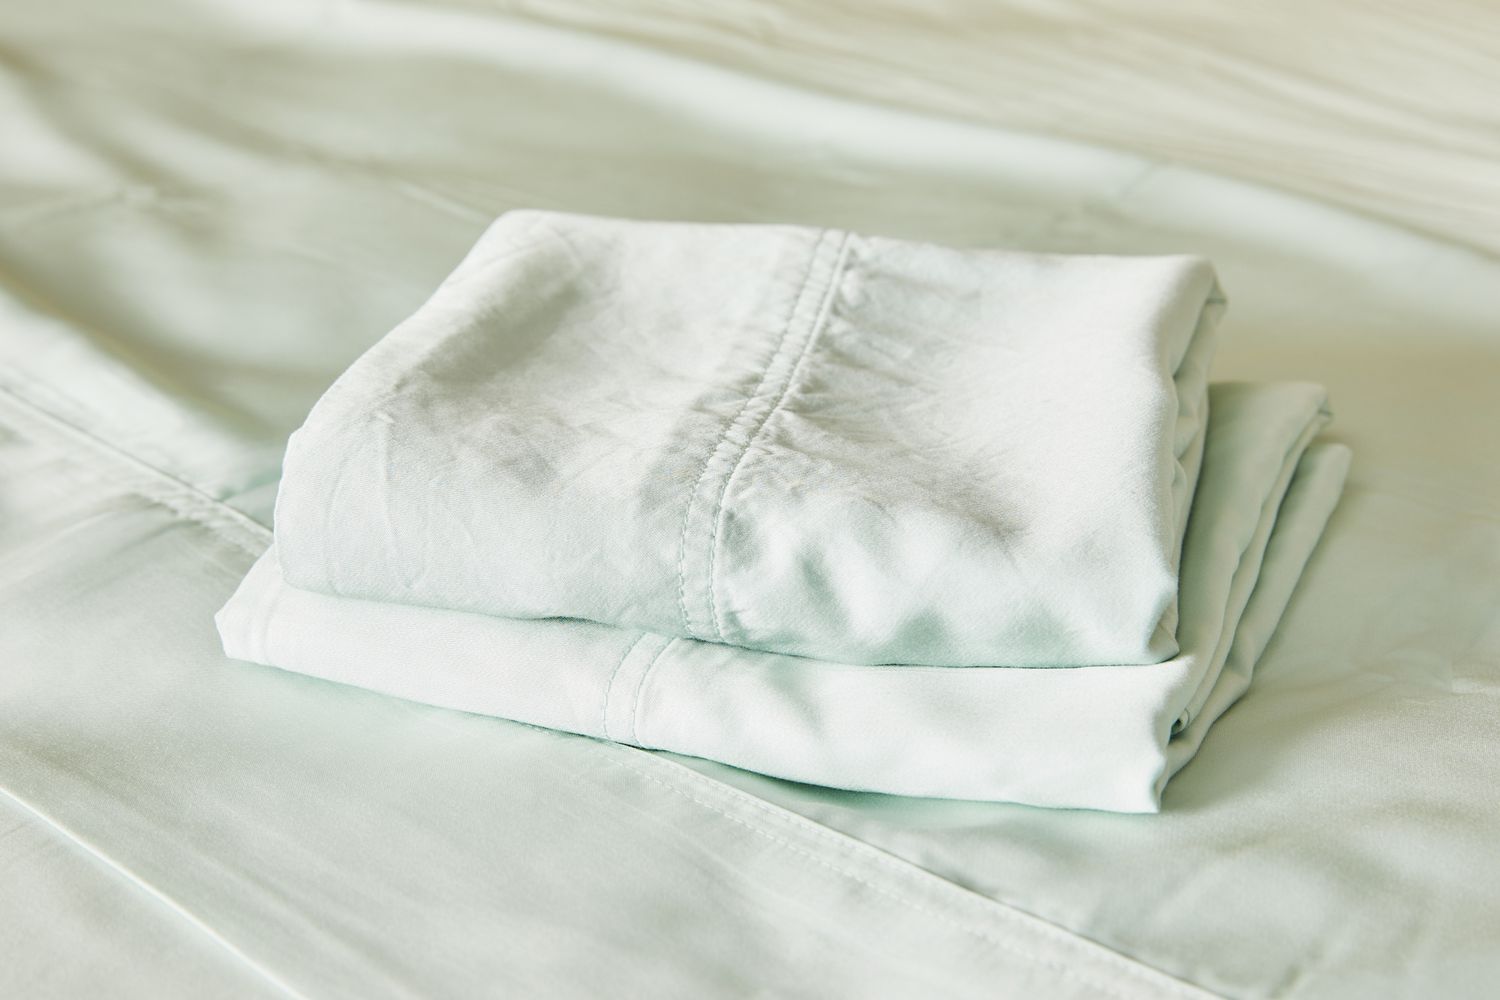 Bamboo Bliss Resort Bamboo Collection by RHH Sheet Set pillowcases folded on top of sheets